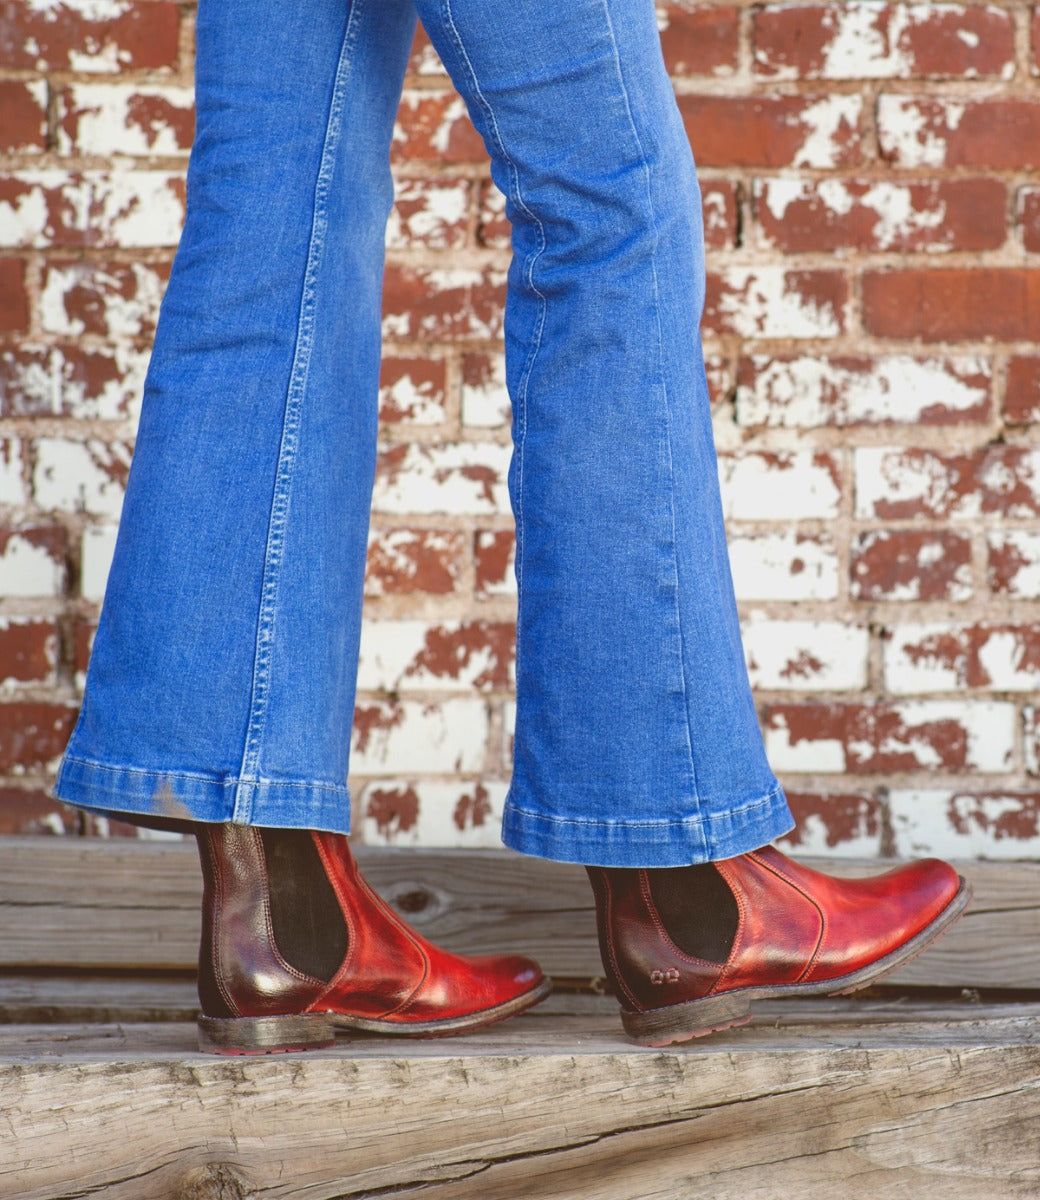 A woman wearing Nandi chelsea boots in cranberry color.